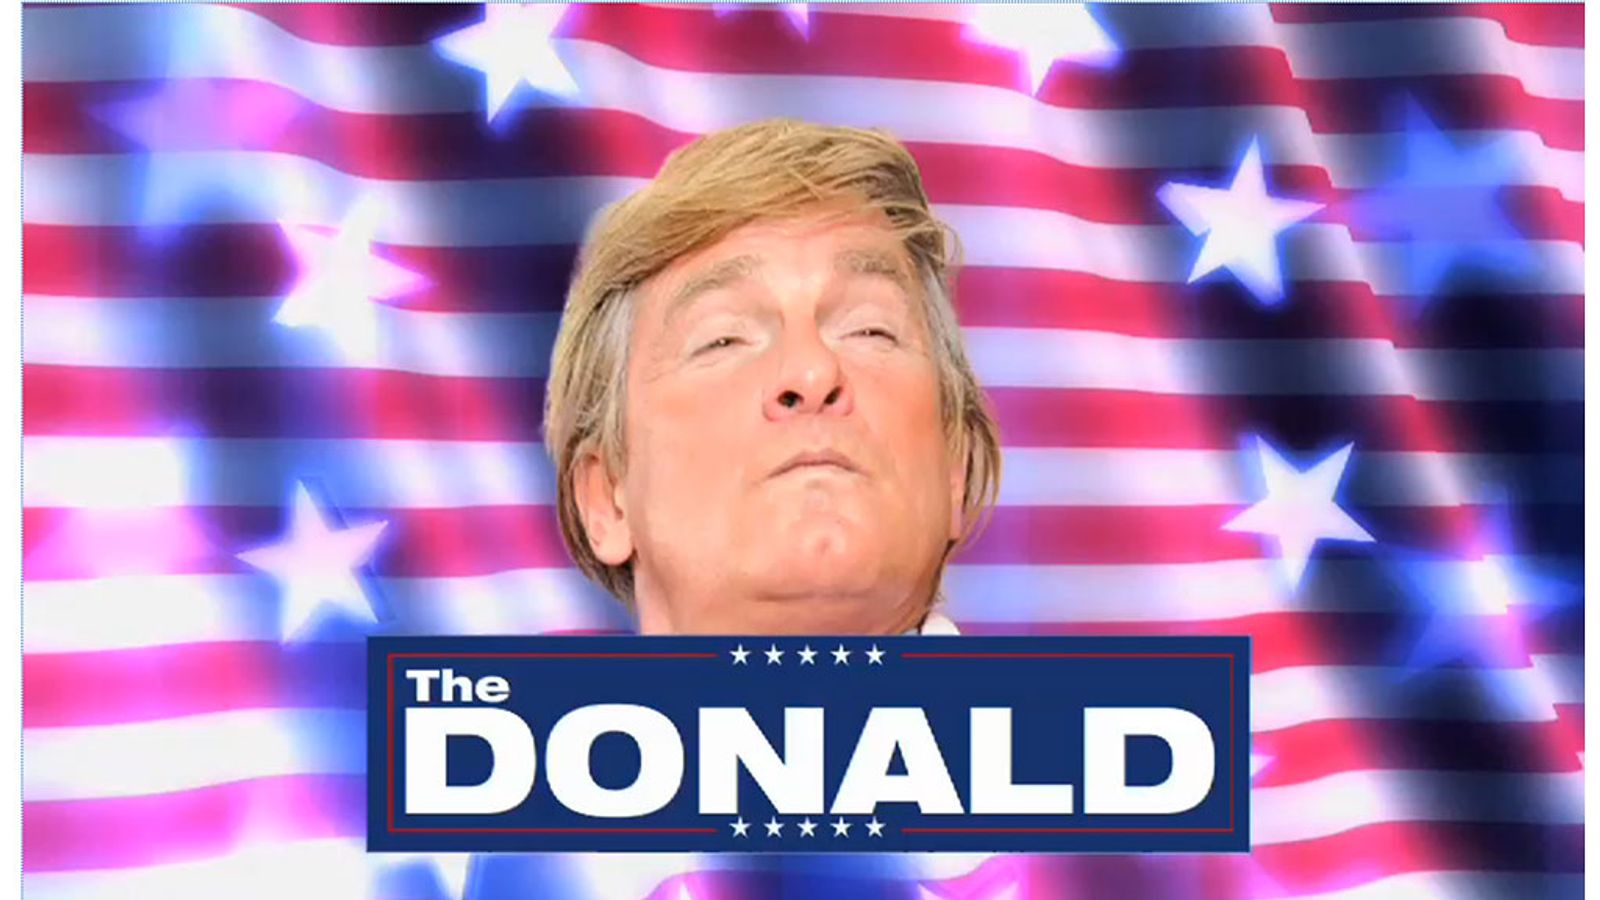 Trump XXX Parody 'The Donald' Being Rereleased Thanks To Consumer Demand